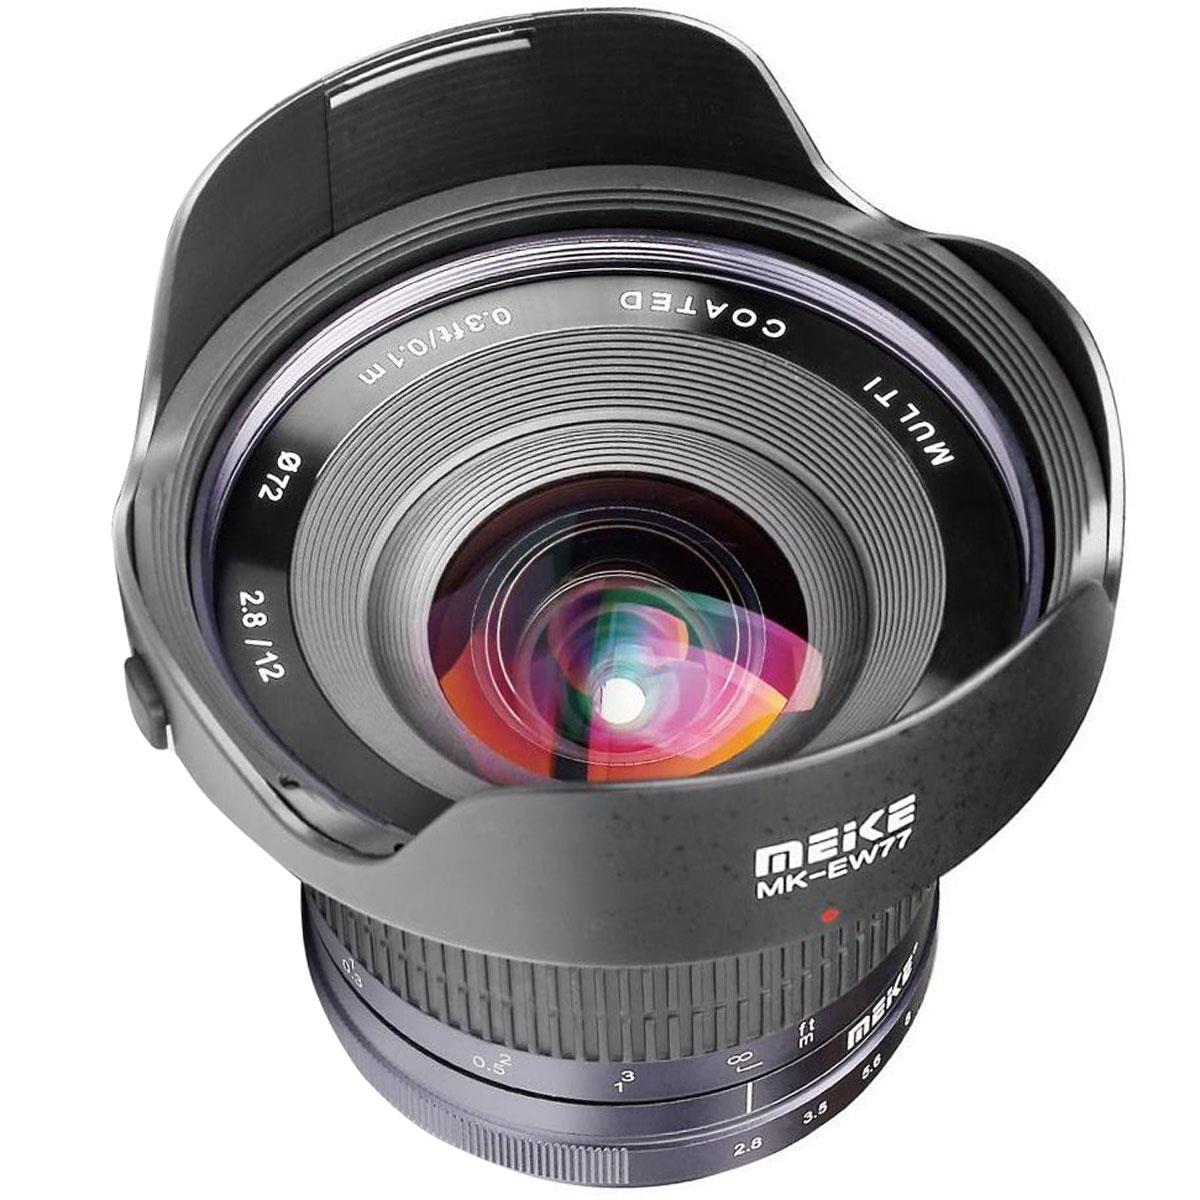 Image of Meike 12mm f/2.8 Lens for Micro Four Thirds